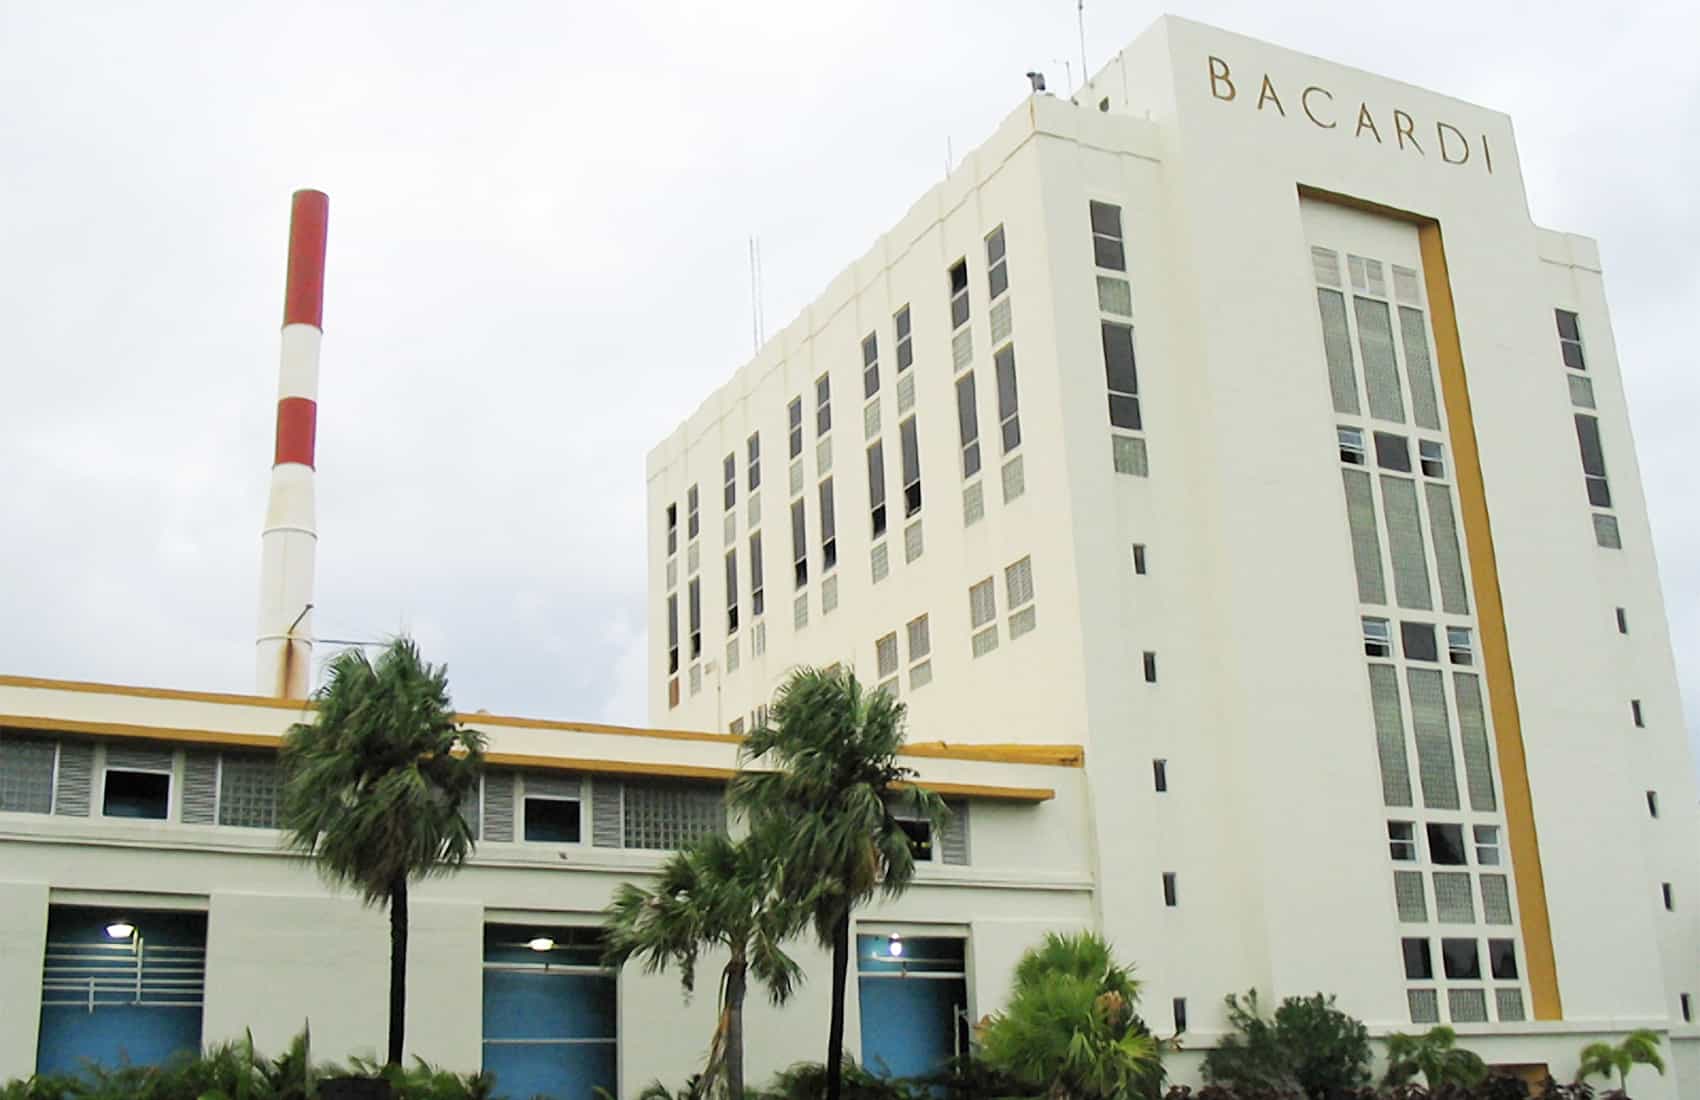 Bacardi cathedral